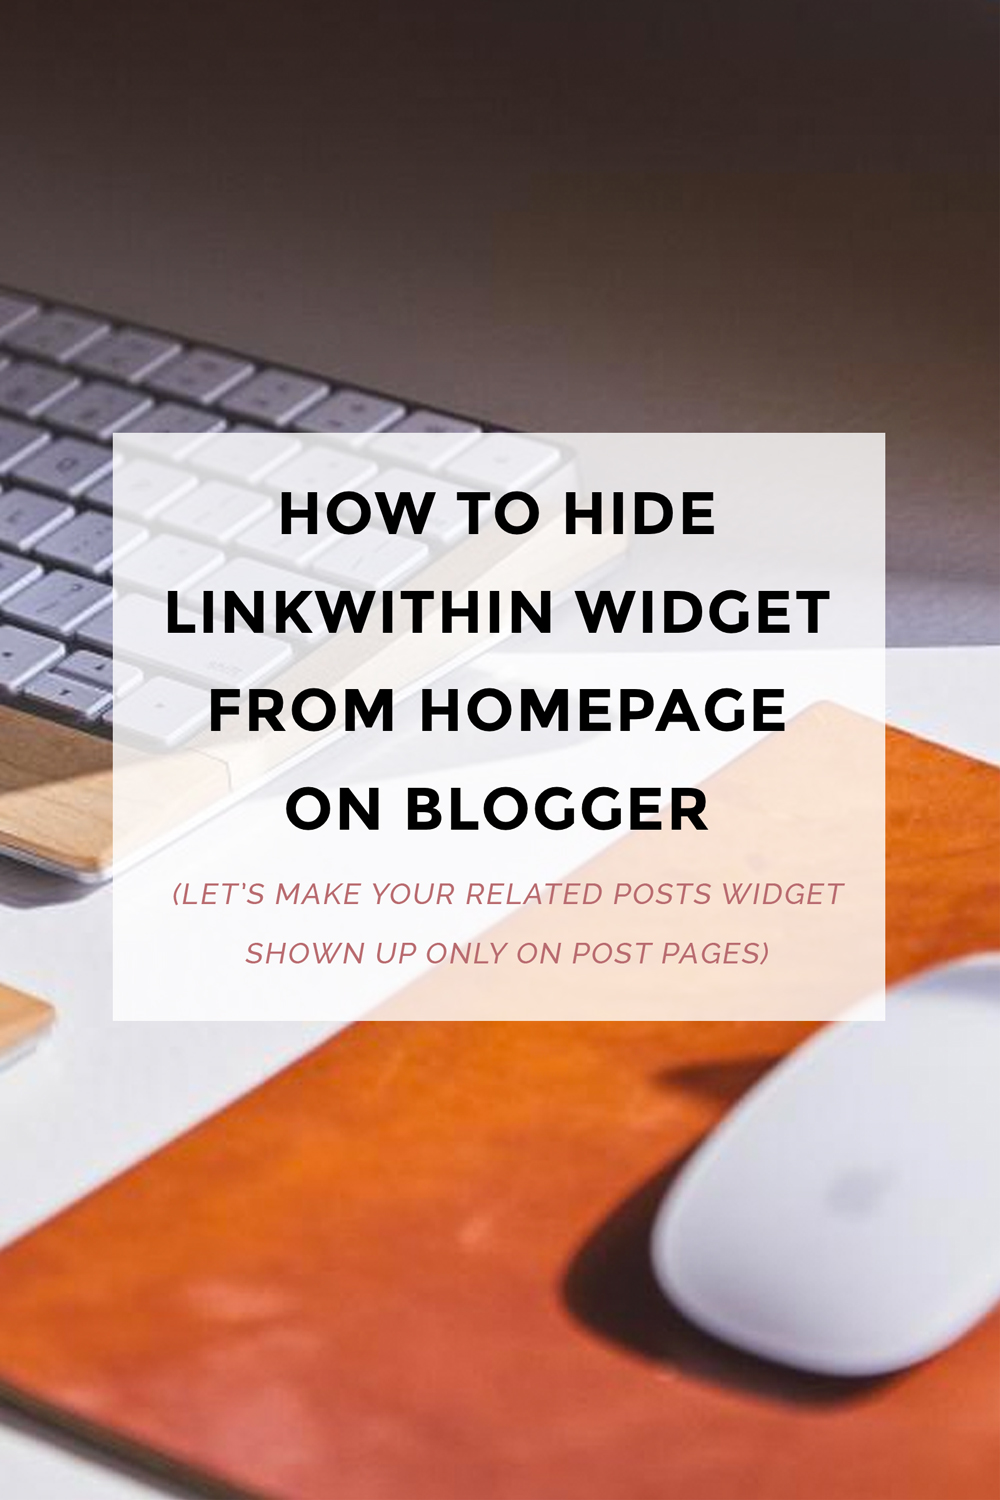 How To Hide Linkwithin Widget From Homepage On Blogger